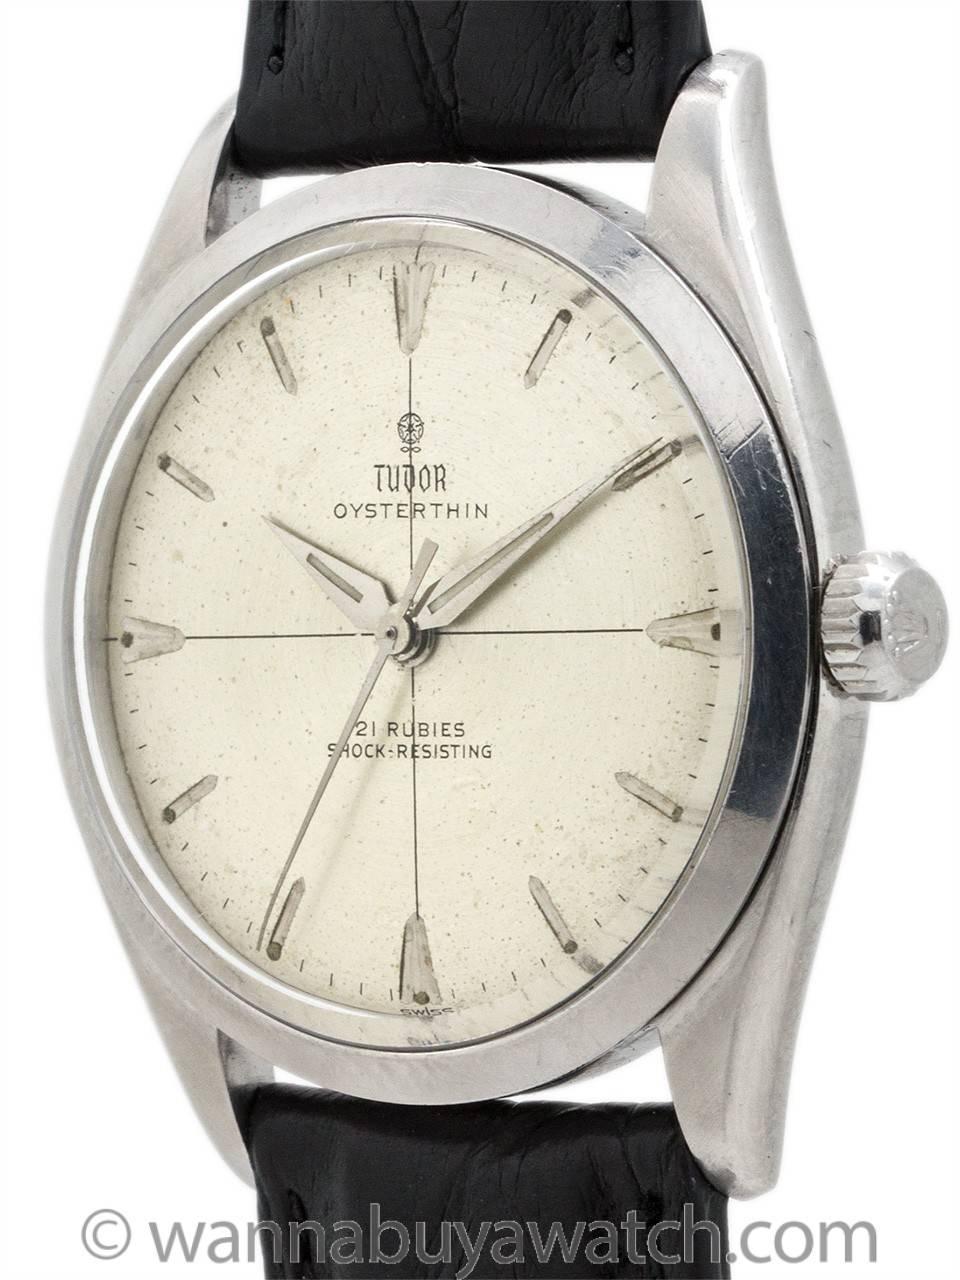 Tudor Oyster-Thin ref 7960 circa 1960. Makes a wonderful commemorative gift for 1960 birthdays and wedding anniversaries. Unusual model housed in 35mm diameter Oyster case with screw down crown and screw down caseback. Caseback engraved “Original